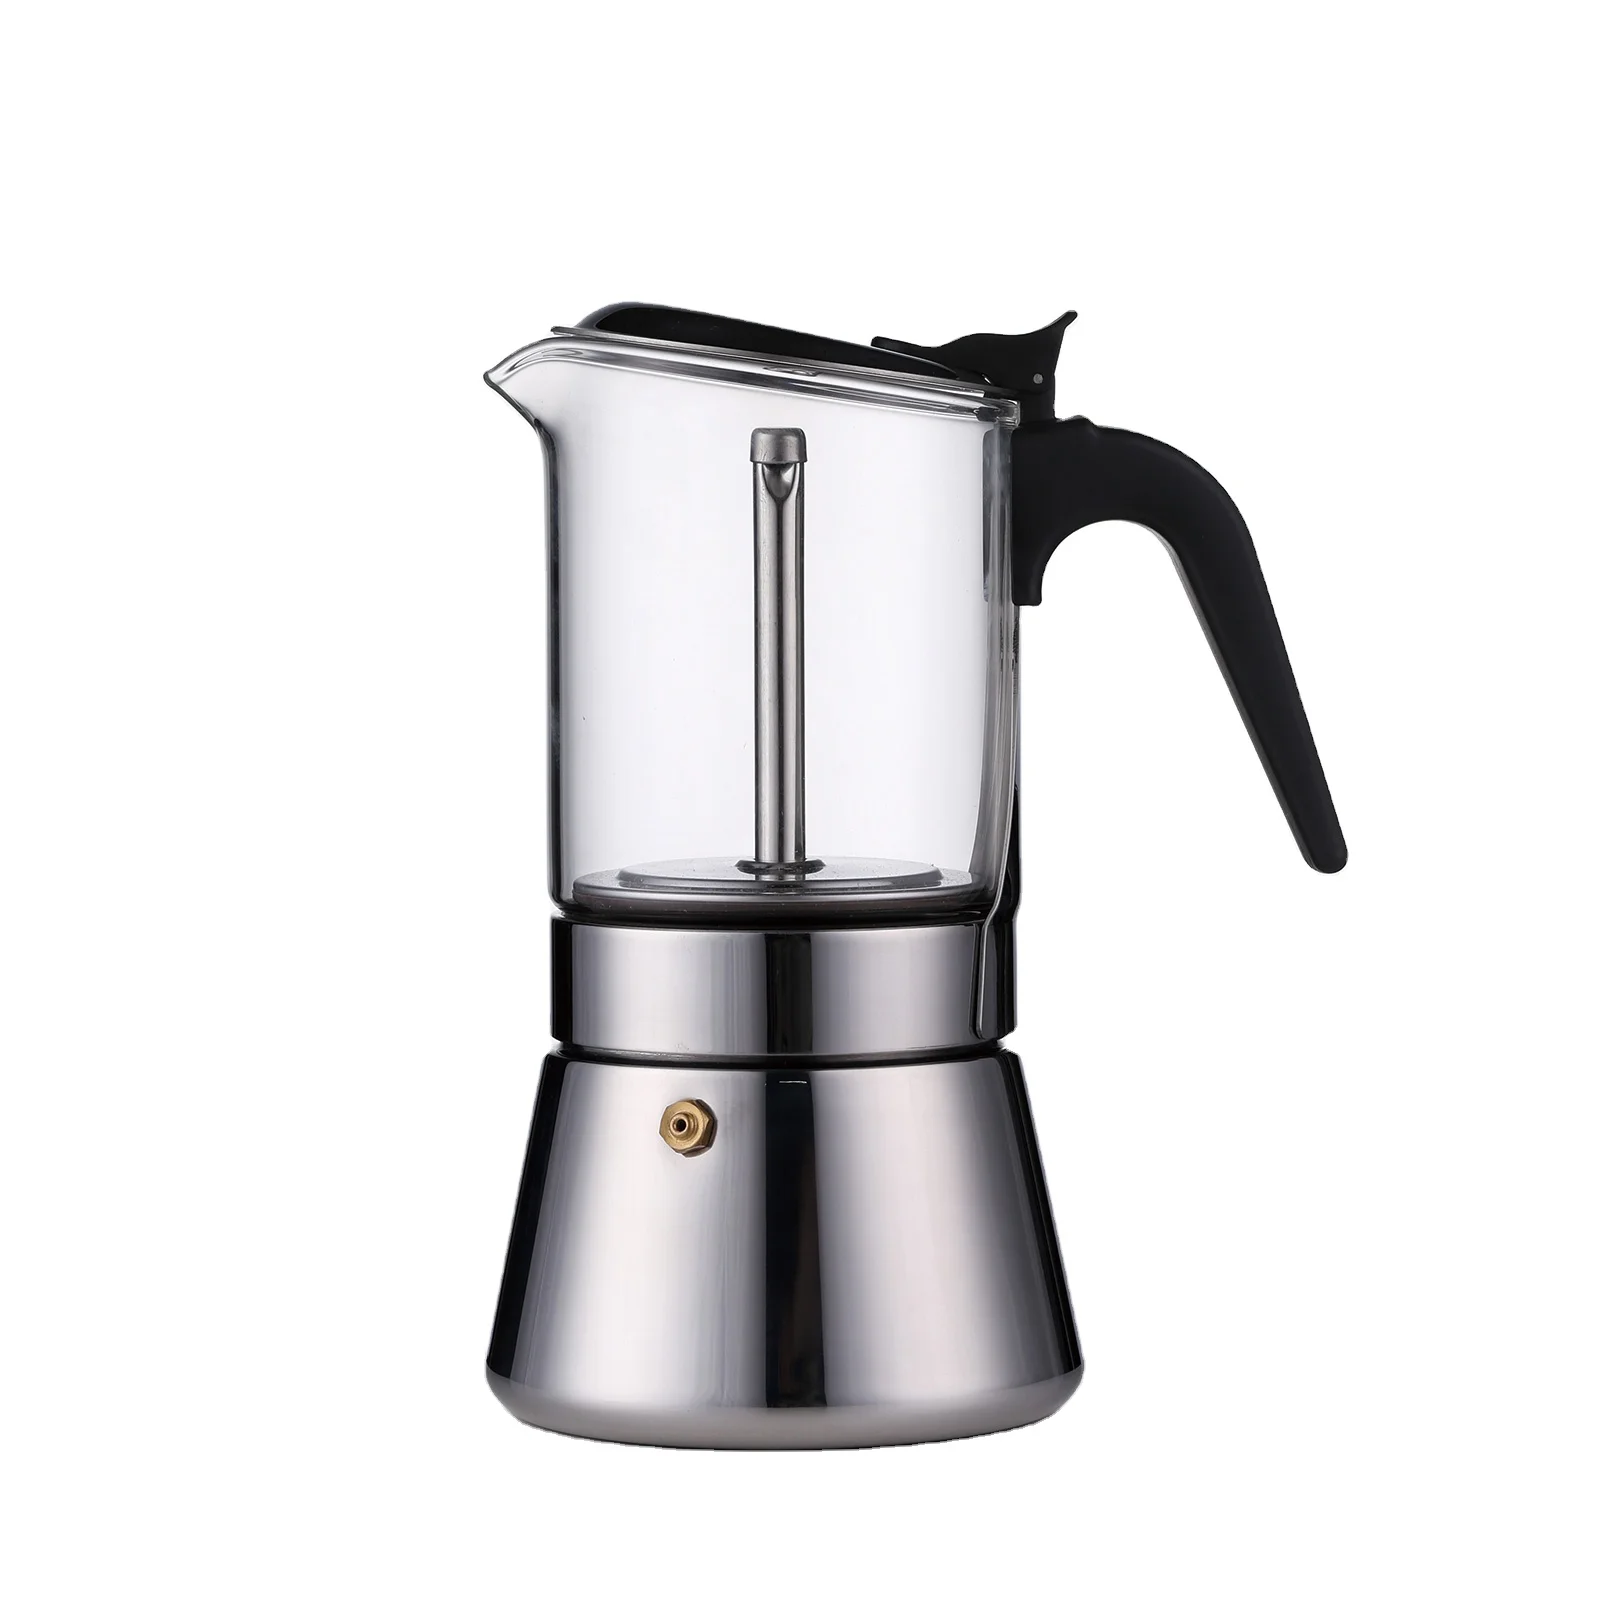 

Moka Pot High-quality New Design High Borosilicate Glass&Stainless Steel Transparent Espresso Lower part is replaceable